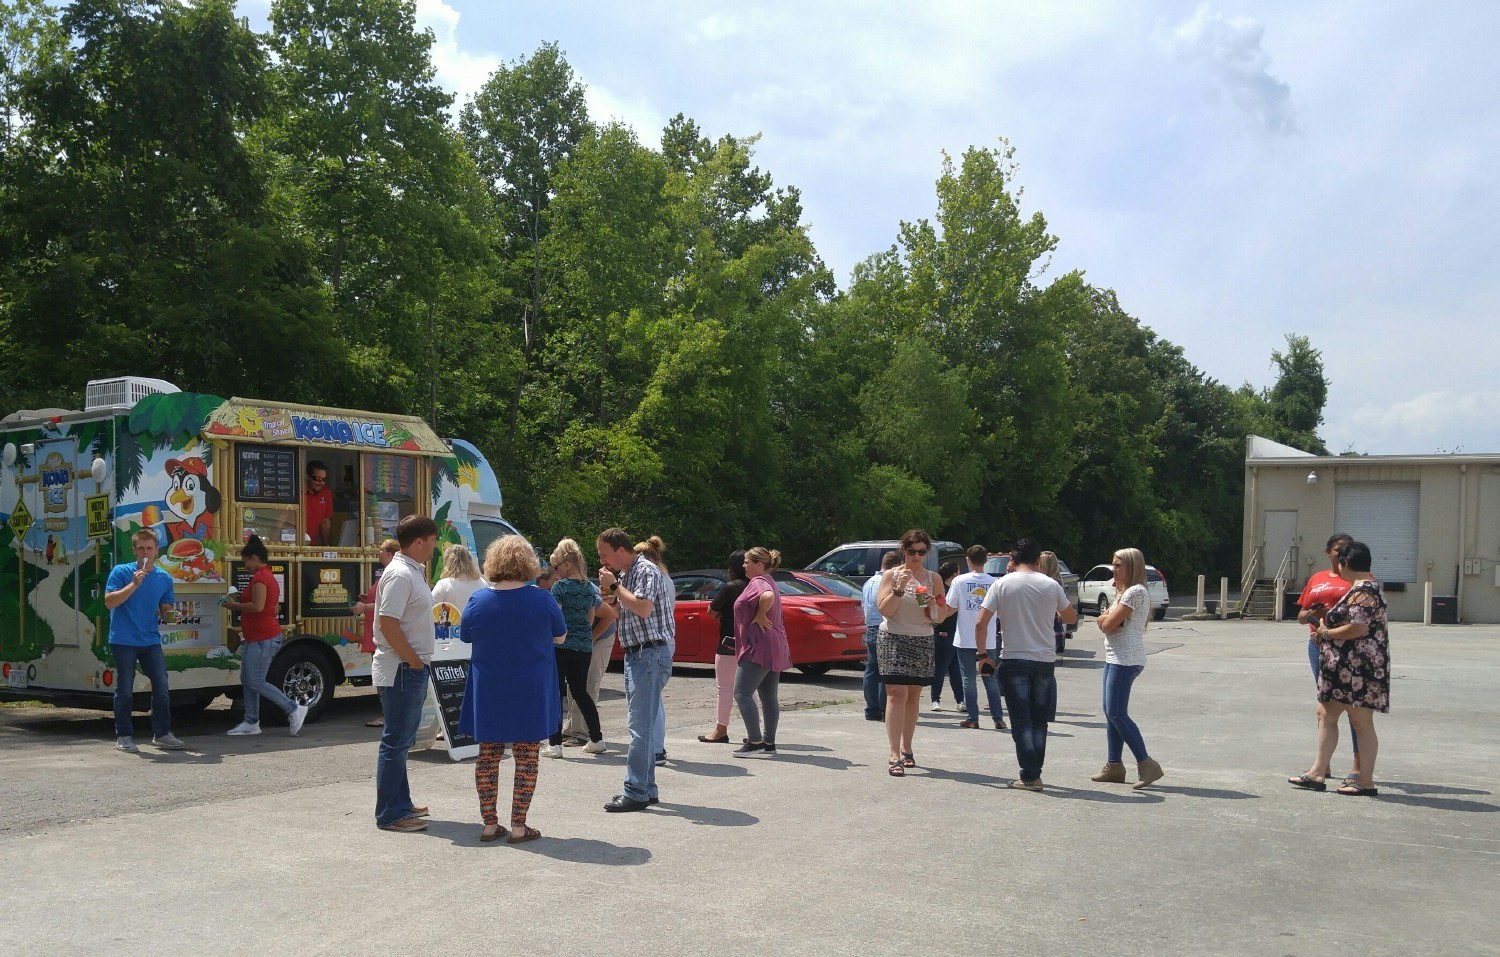 During the summer we have various food trucks come to our office. This was an Hawaiian shaved Ice truck!